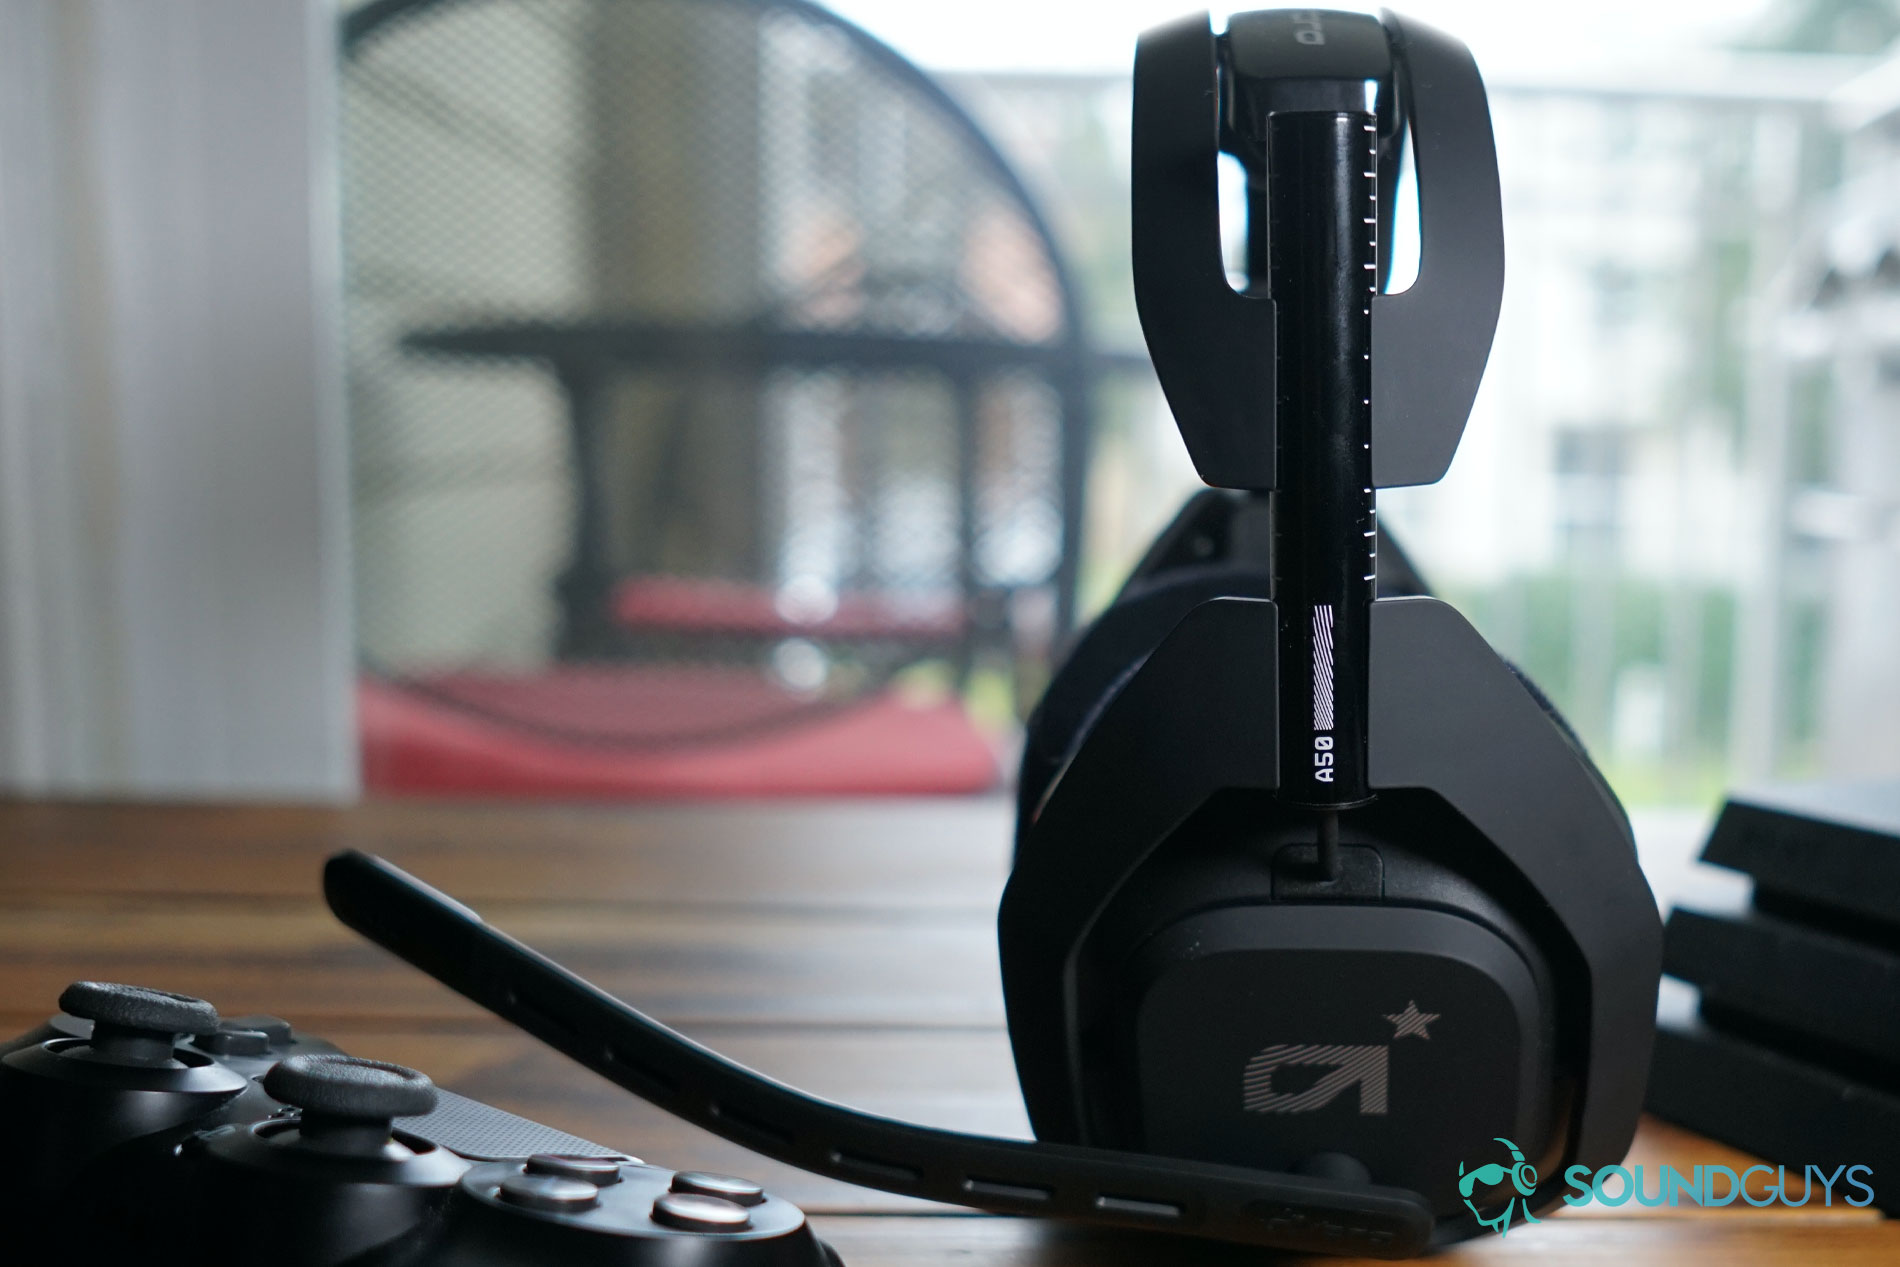 The Astro A50 Wireless sits between a dualshock controller and a Playstation 4 on a wooden coffee table.